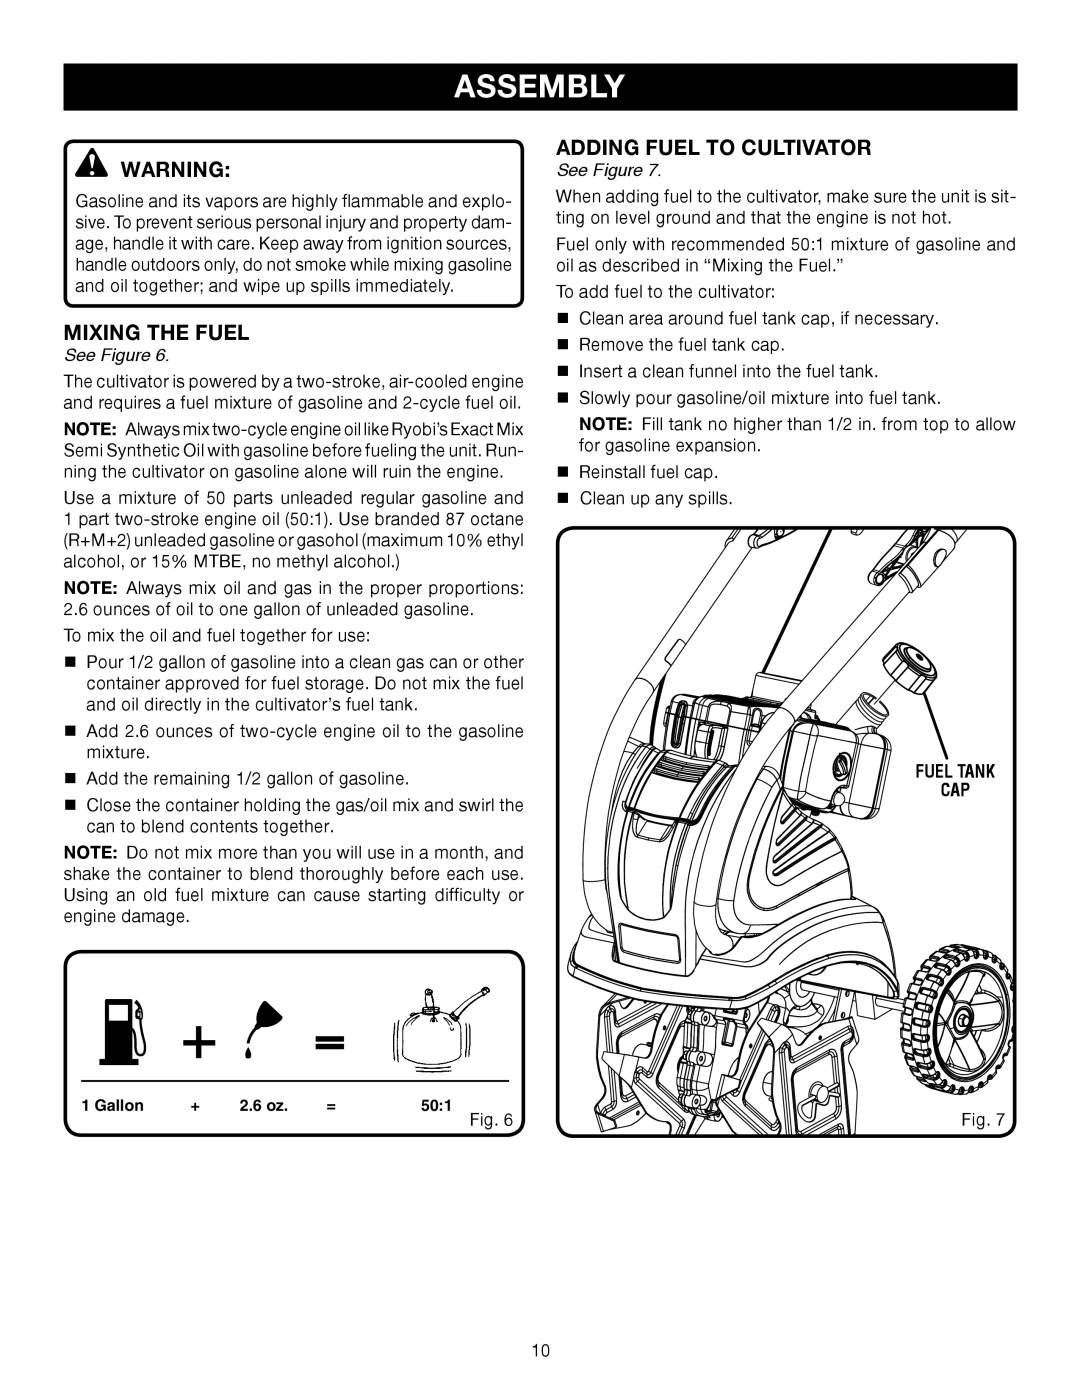 Ryobi Outdoor RY60511A manual Mixing The Fuel, Adding Fuel To Cultivator, Assembly, See Figure, Fuel Tank Cap, 501 Fig 